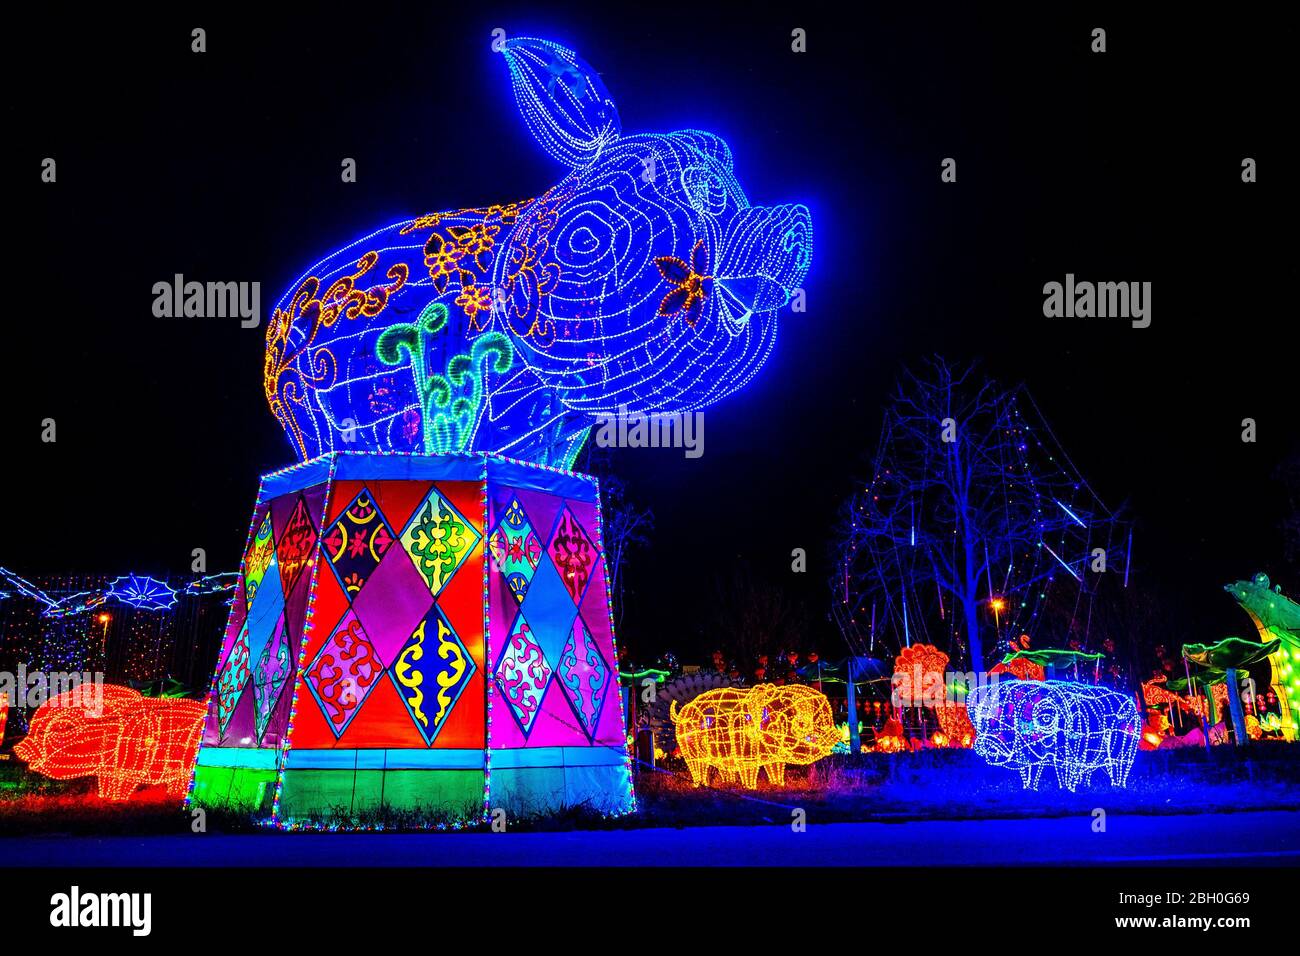 pig in chinese zodiac animals at lantern festival background Stock Photo